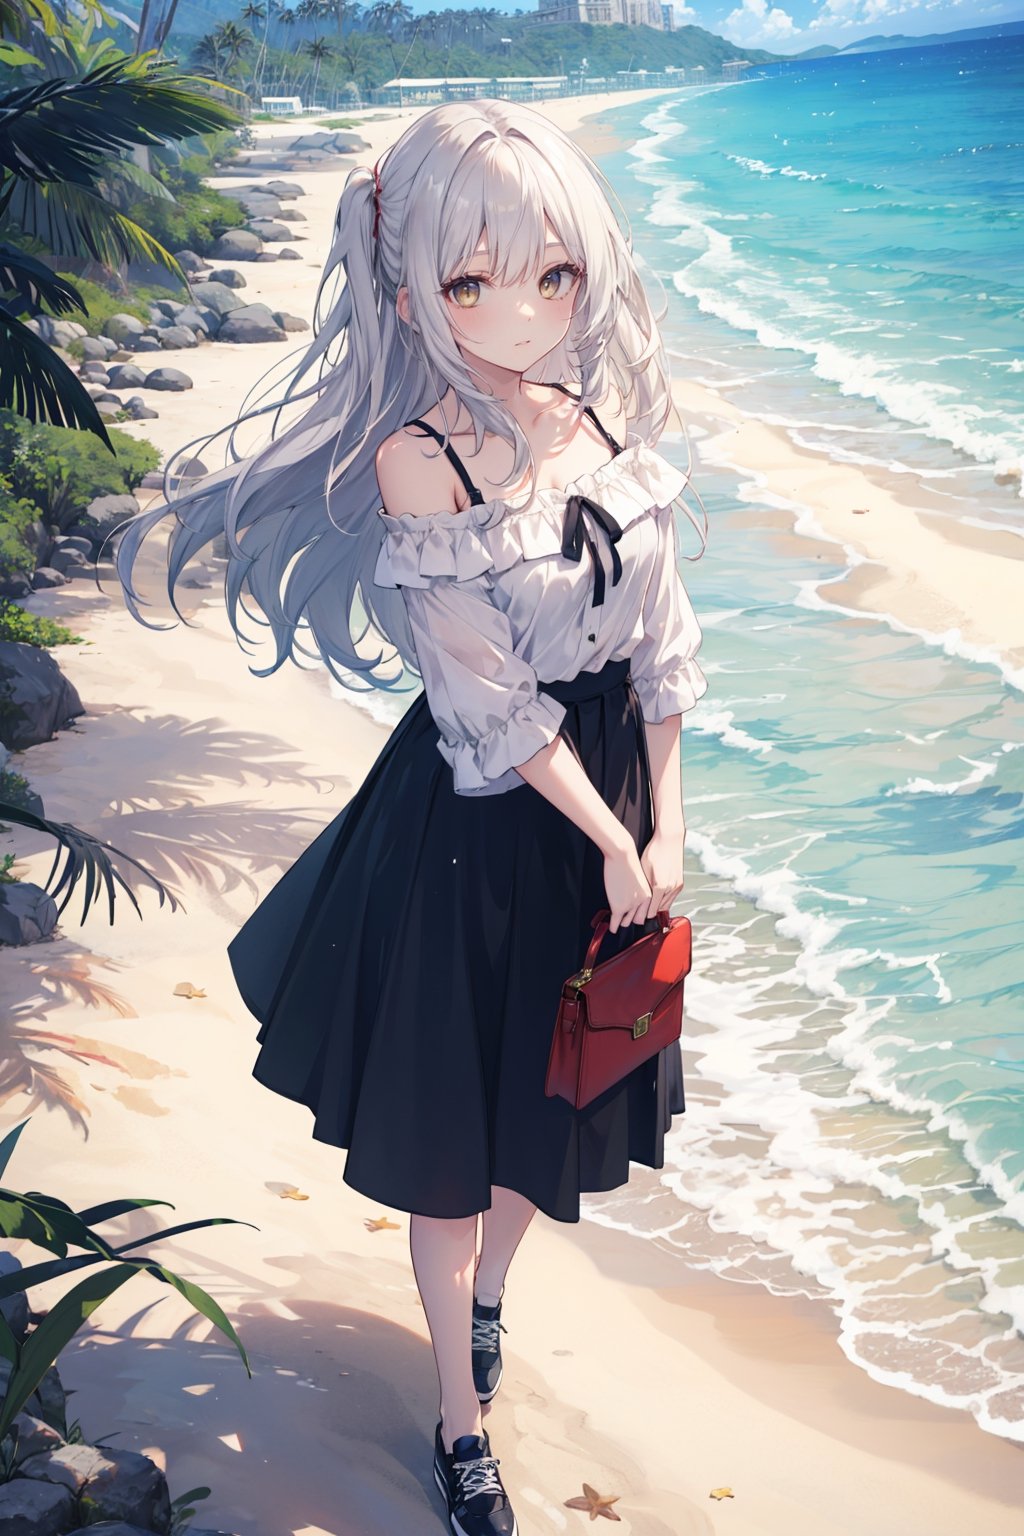 A long-haired beauty smiling, wearing an off-the-shoulder top, a skirt, canvas shoes, with a beach background.